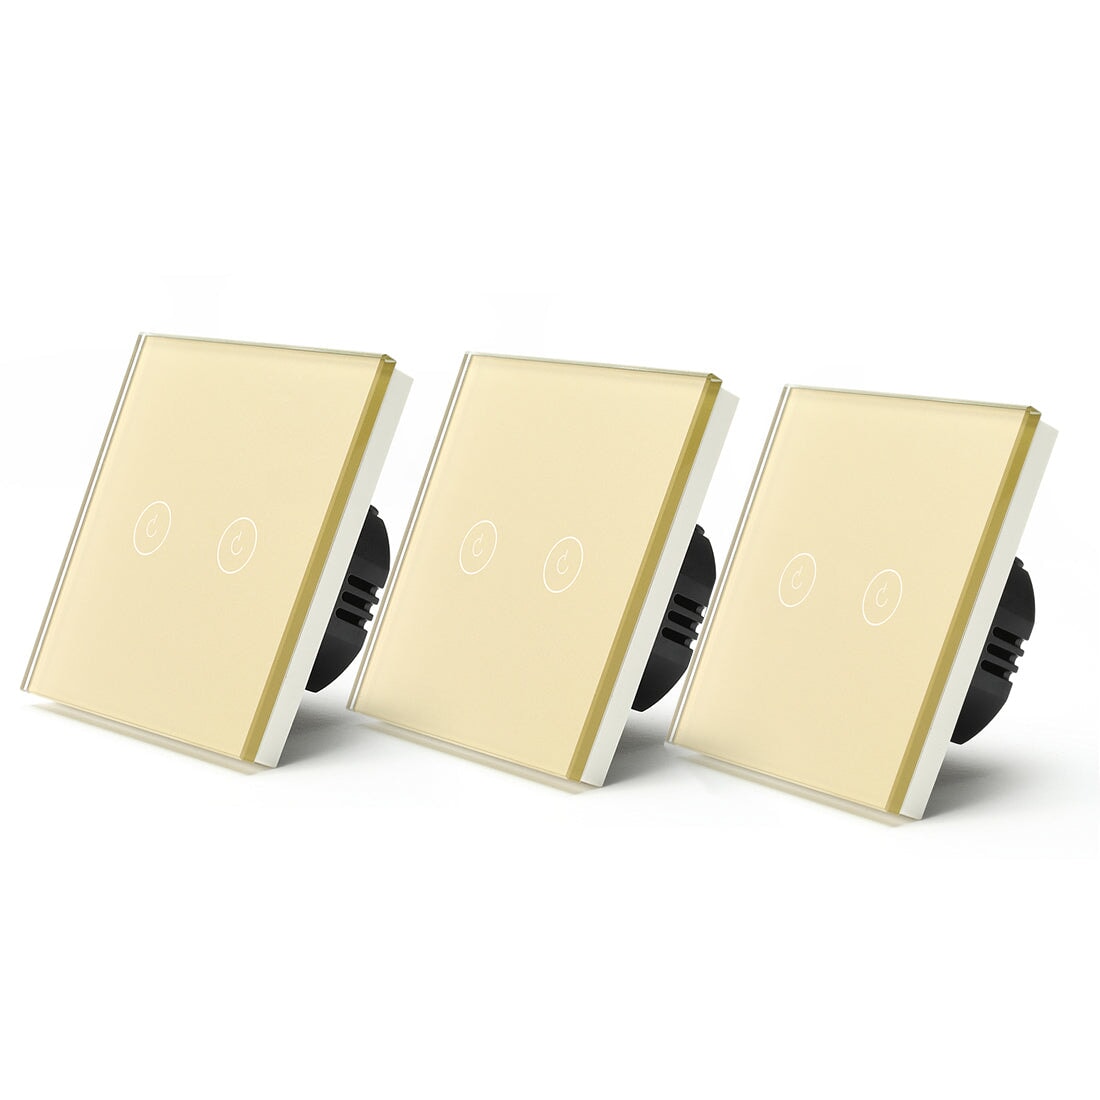 Bseed Smart Wifi Touch Switch 2 Gang 1/2/3 Way 1/2/3 Pcs/Pack Wall Plates & Covers Bseedswitch Golden 3Pcs/Pack 